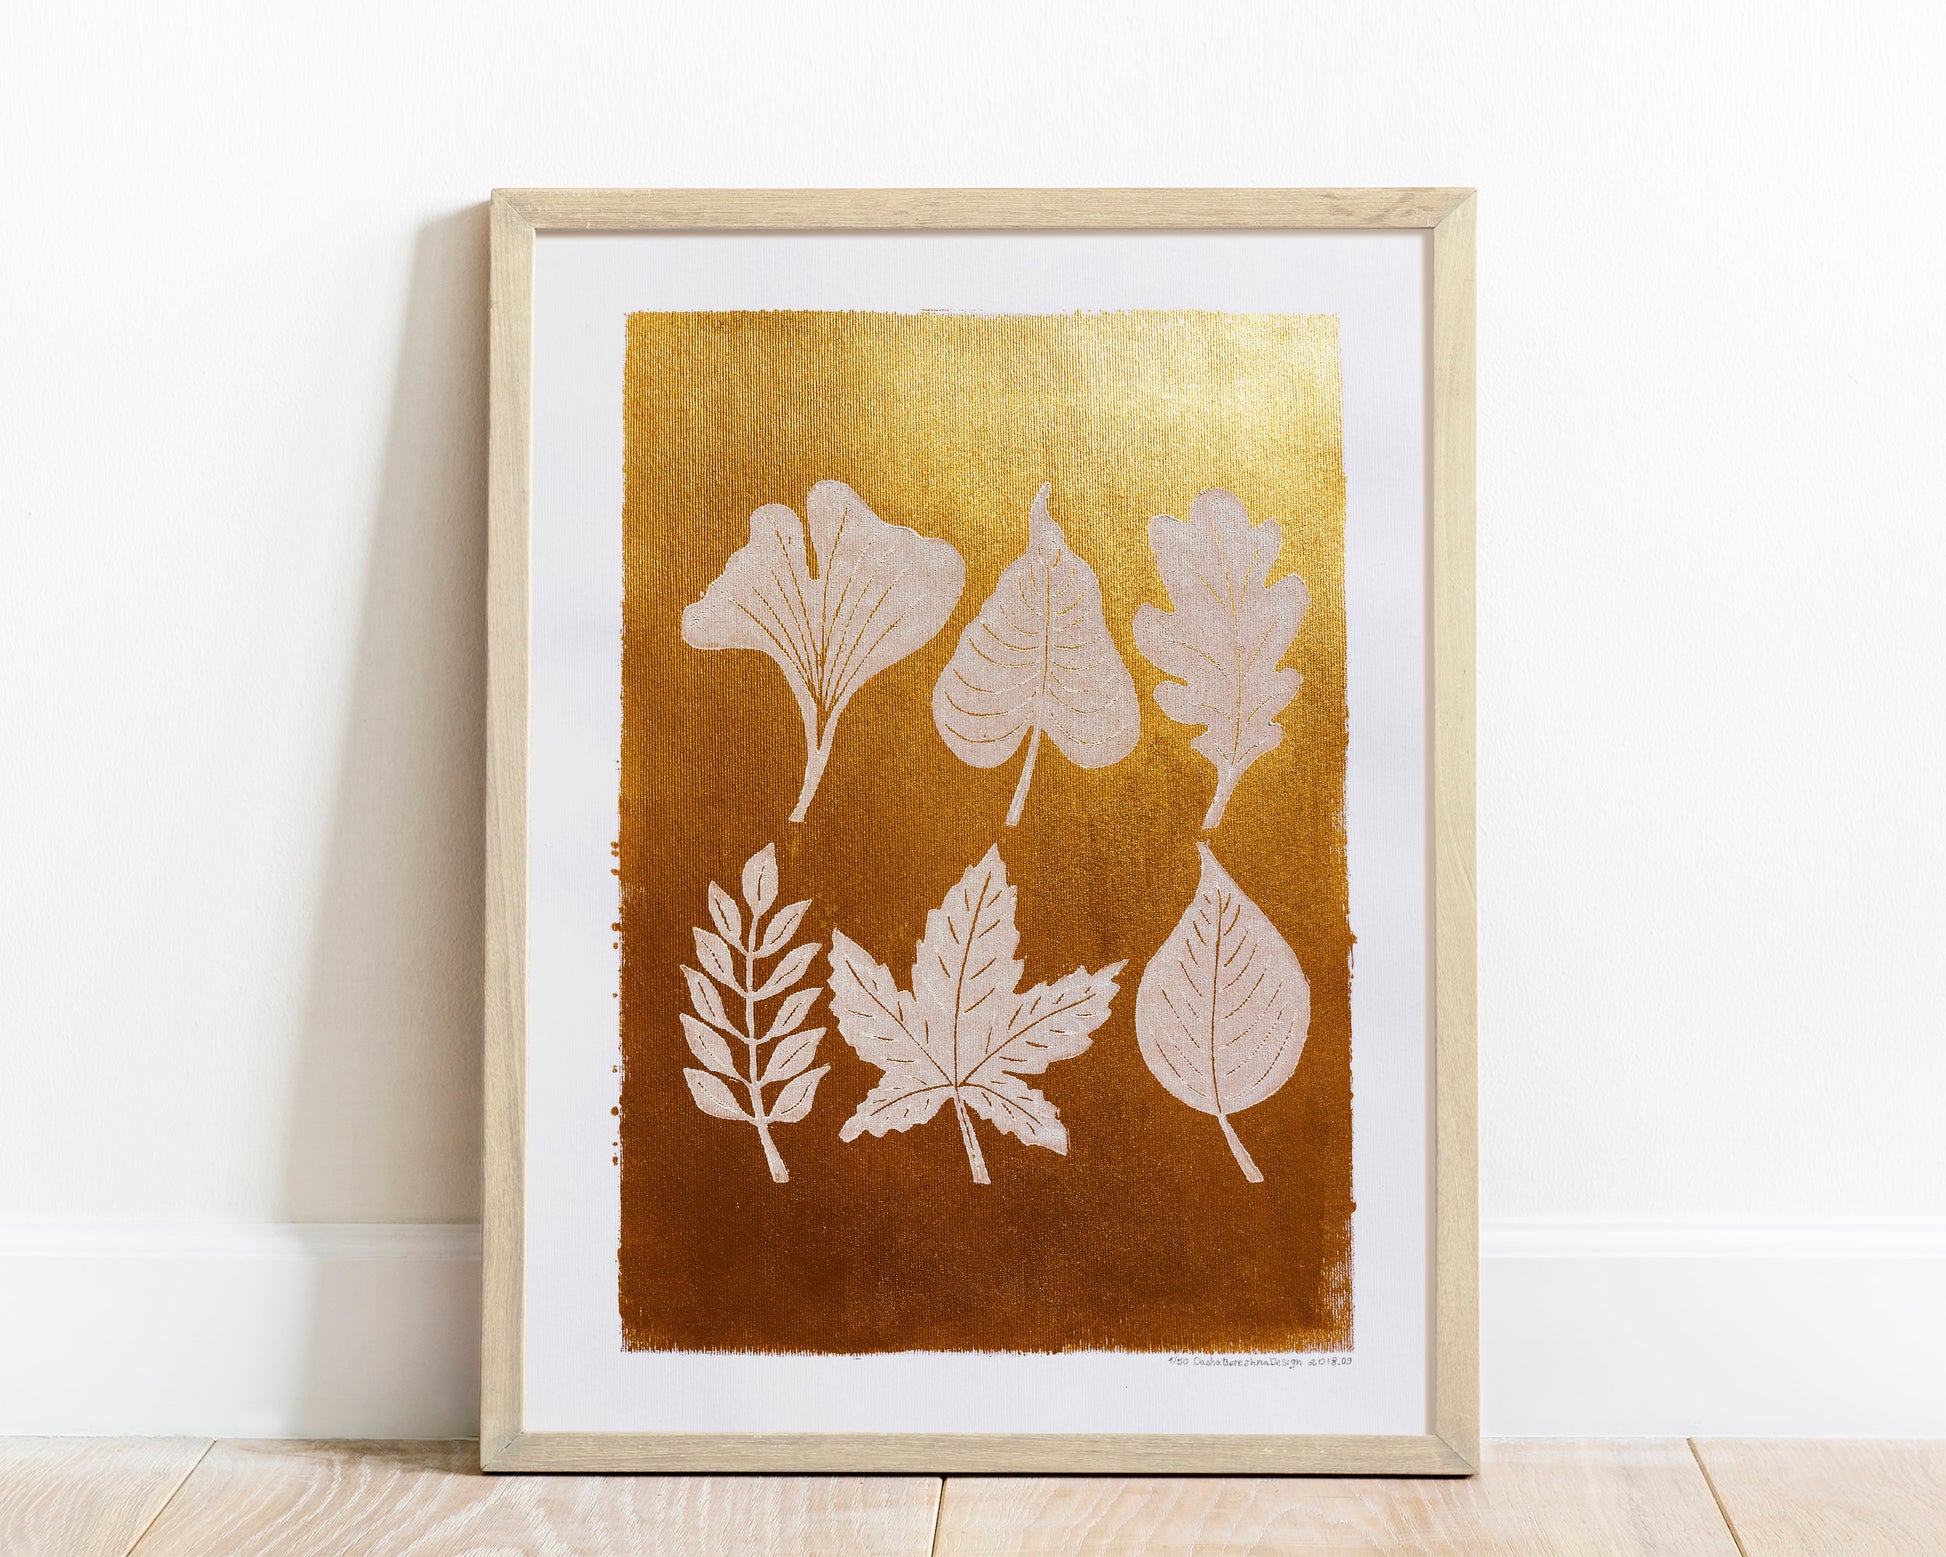 Gold and white fall leaves Linocut print 12x16in for New home gift UNFRAMED / gold acrylic ink, oil ink, lino print, linogravure, autumn wall art, printmaking, handmade art, Nature lover gift, simple artwork, original artwork, houswarming gift, living room, bedroom, modern kitchen decor